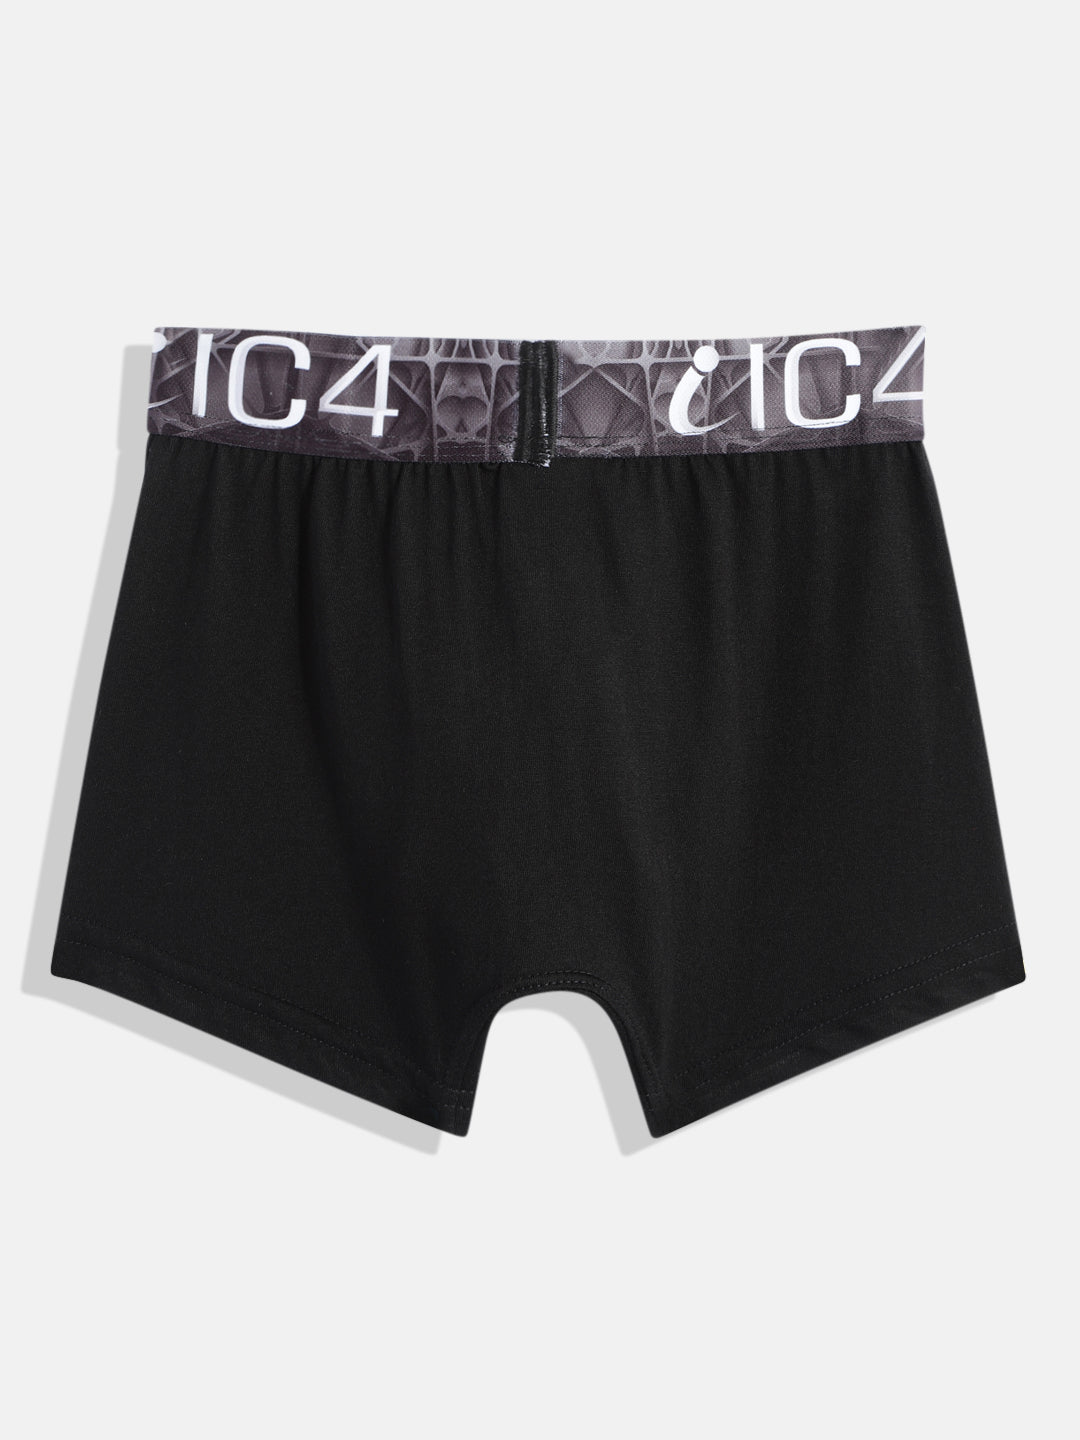 IC4 Boy's Fashion Trunk Combo Pack of 2, Black Color